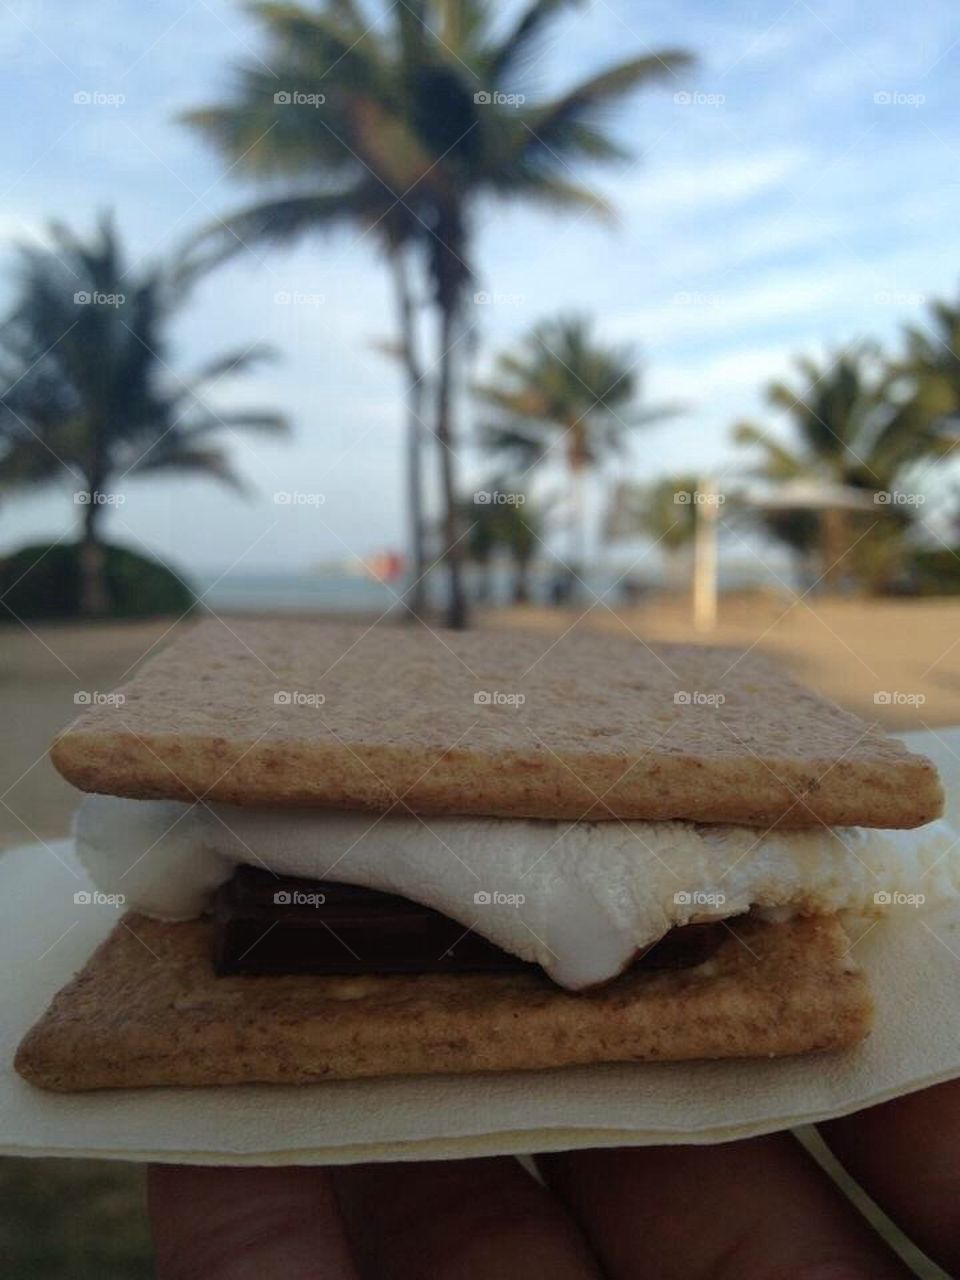 S'mores on a beach